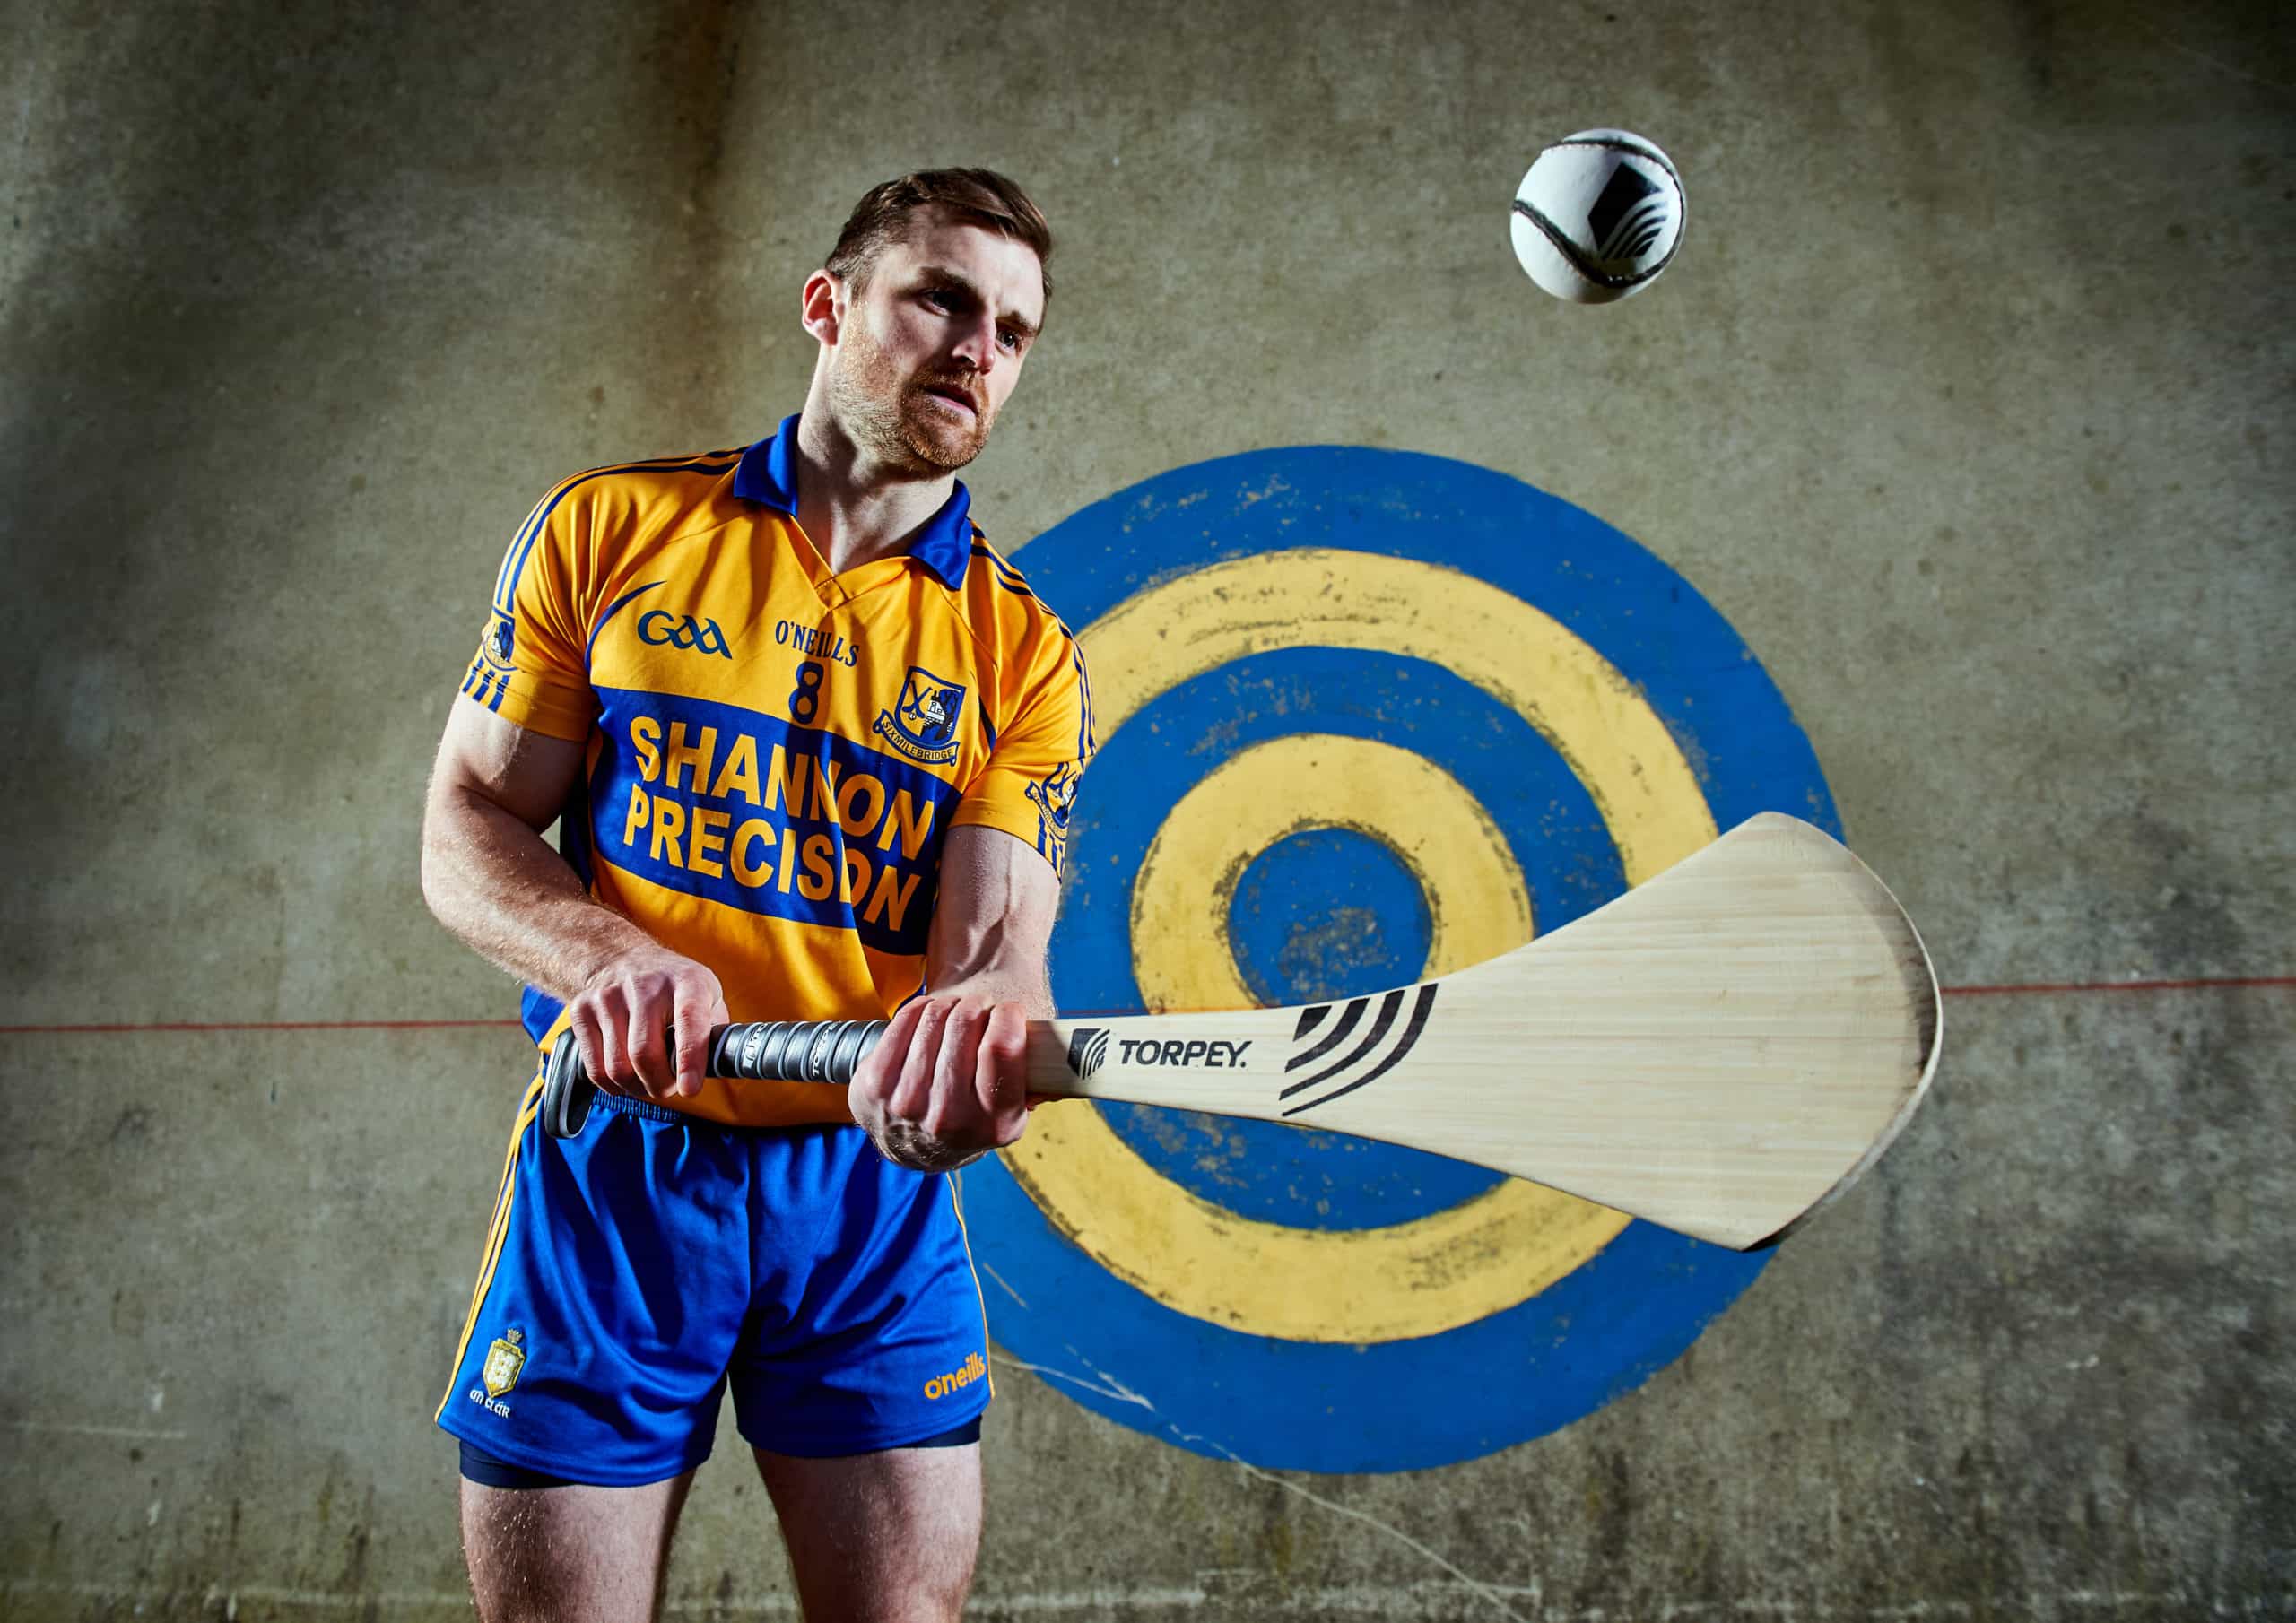 Bamboo set to take the hurling world by storm